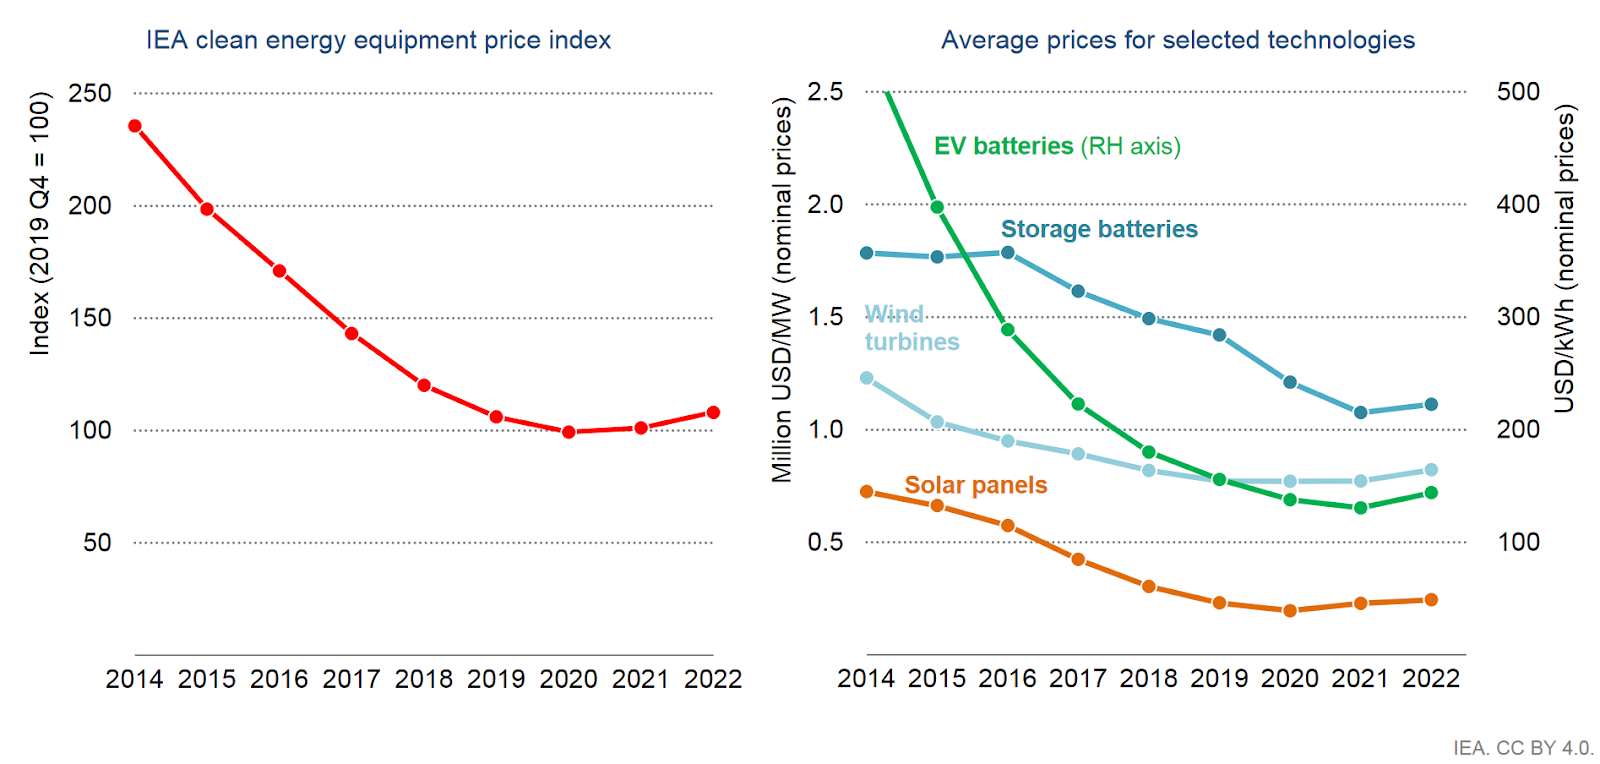 IEA Clean Energy Equipment Price Index and Average Prices for Selected Technologies, Source: IEA